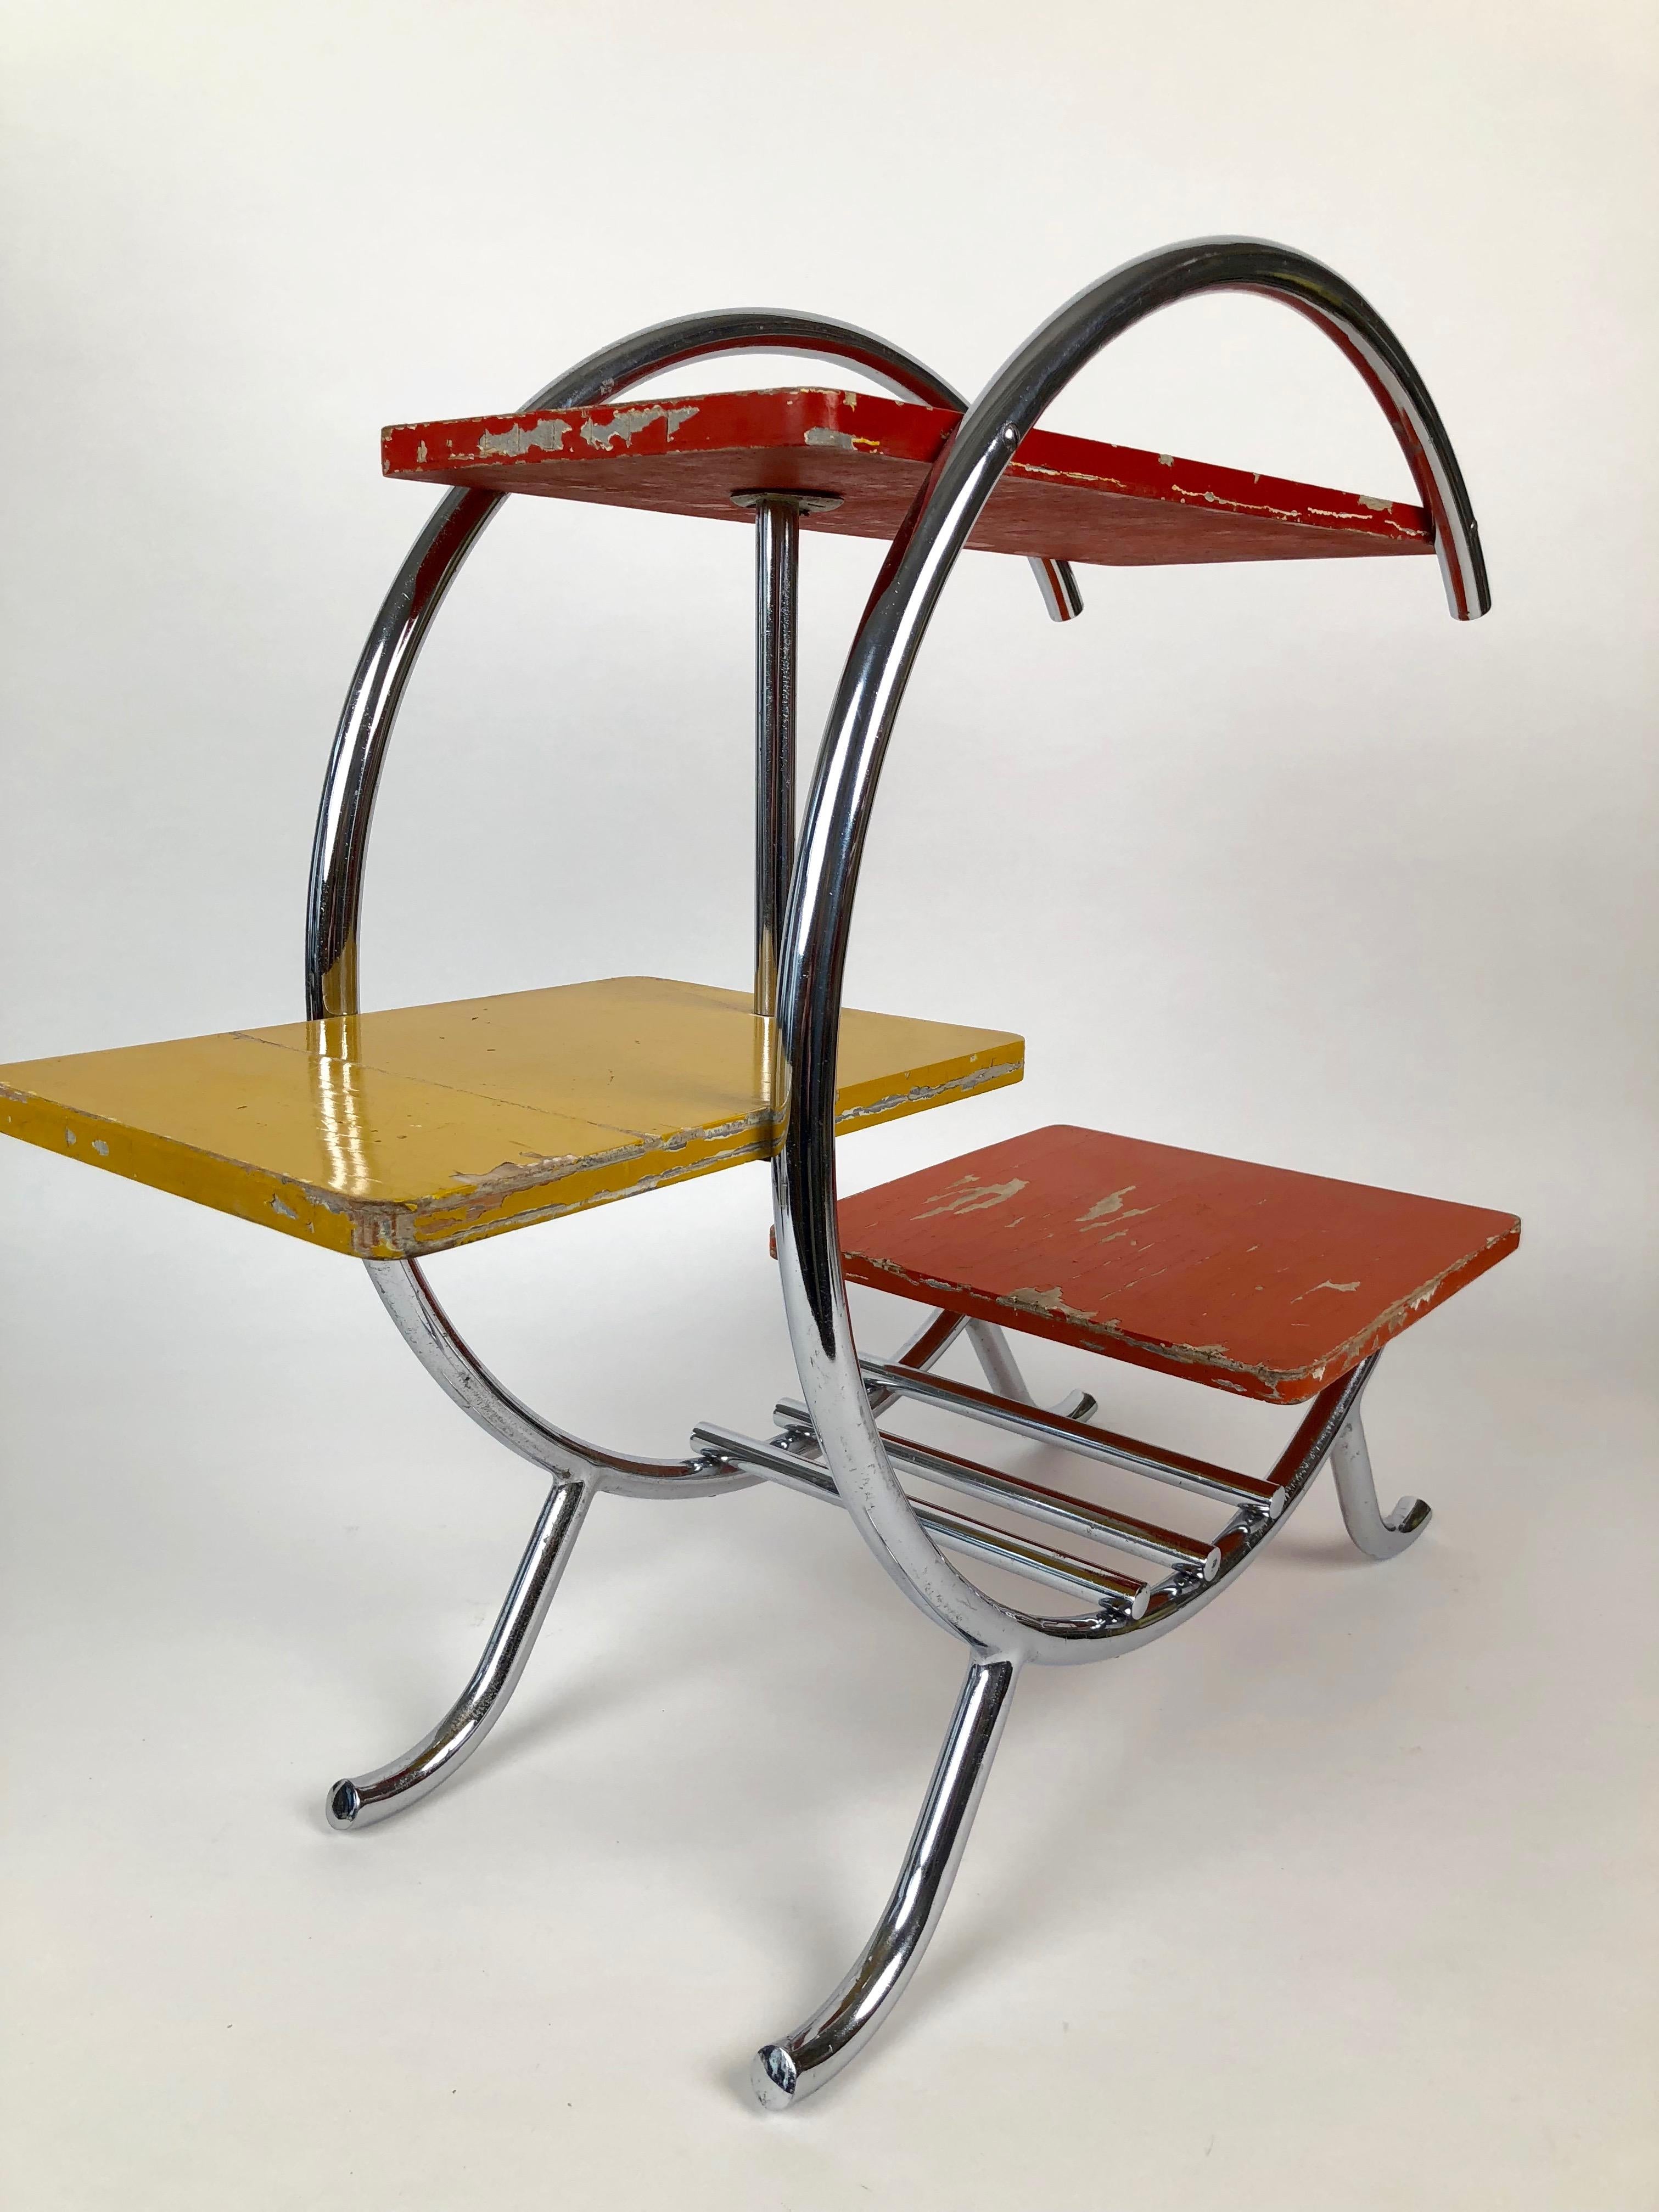 Chrome Etagere with Coral, Yellow and Red Painted Shelves in Bauhaus Style For Sale 1